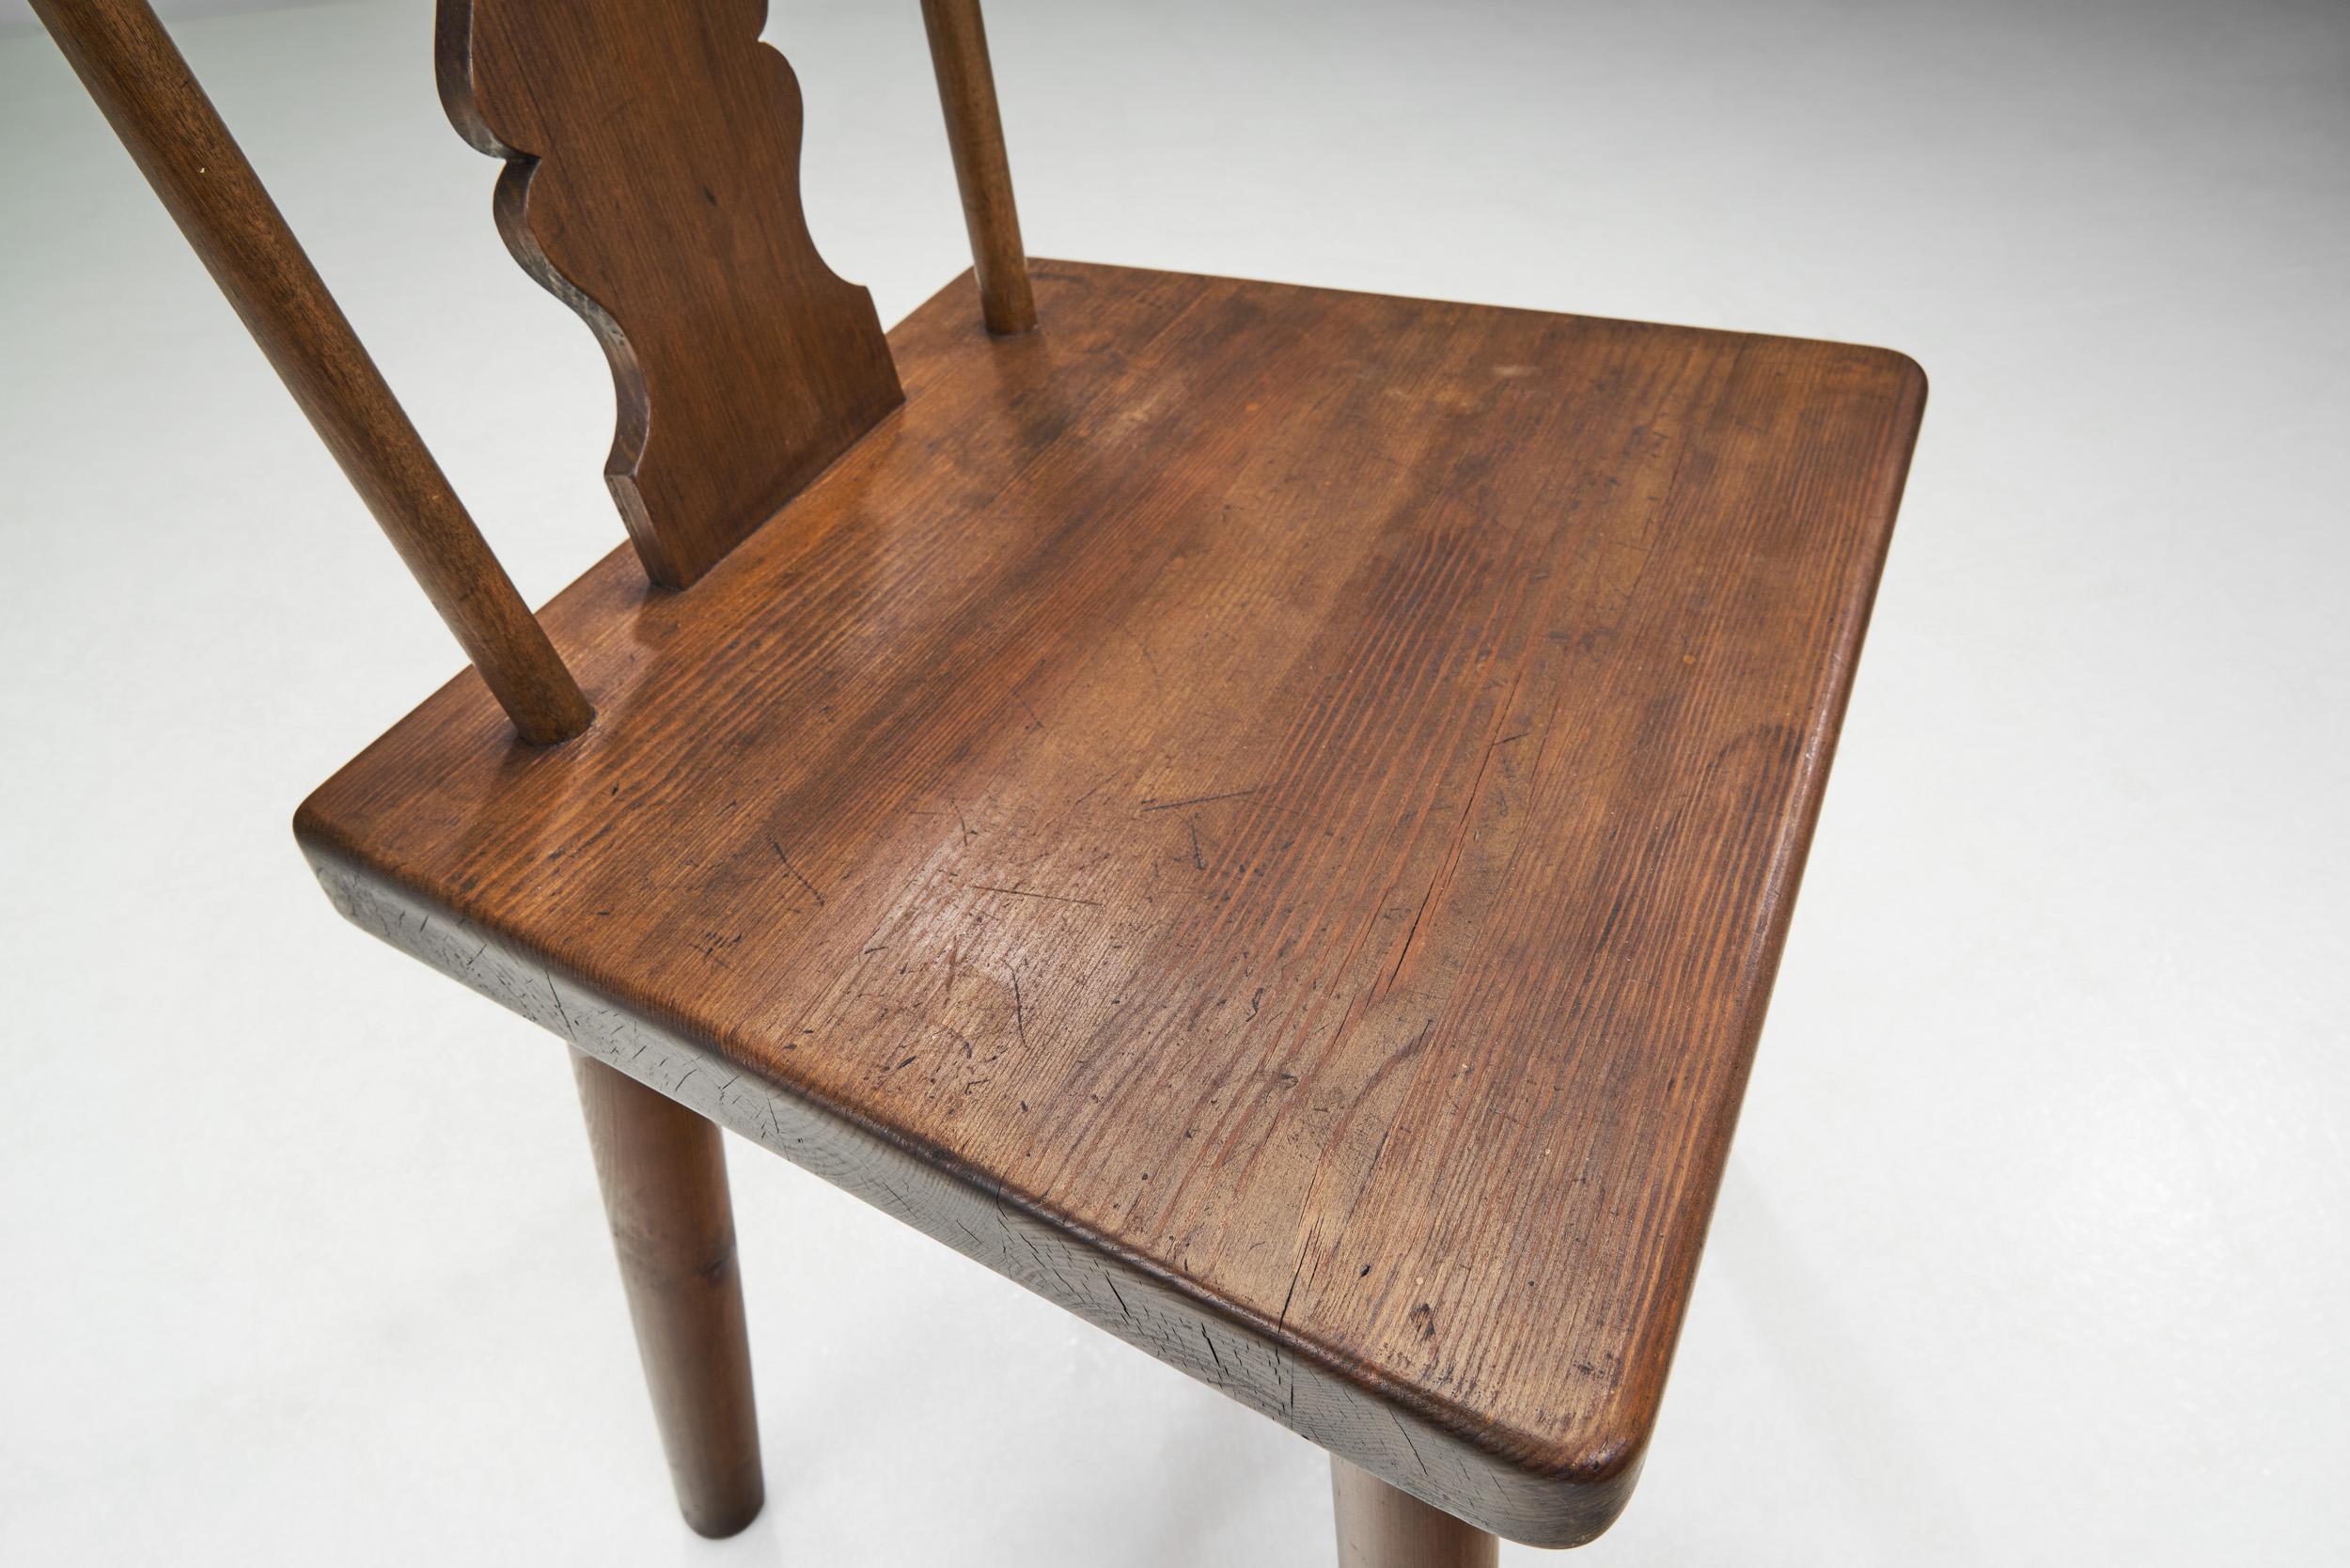 Rustic Solid Pine Chairs with Carved Backs, Europe early 20th century For Sale 5